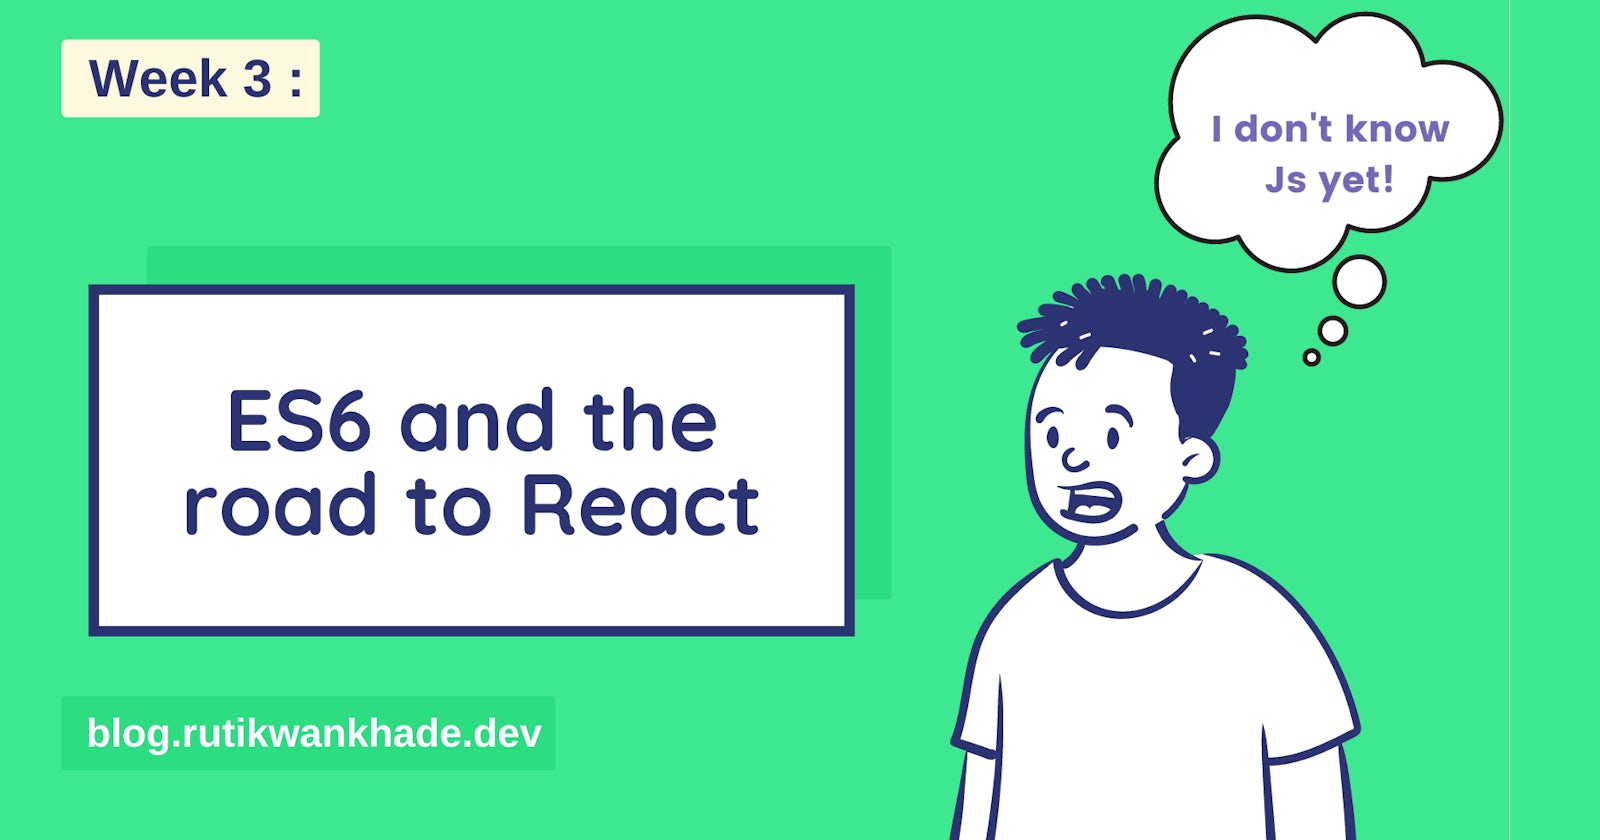 ES6 and the road to react